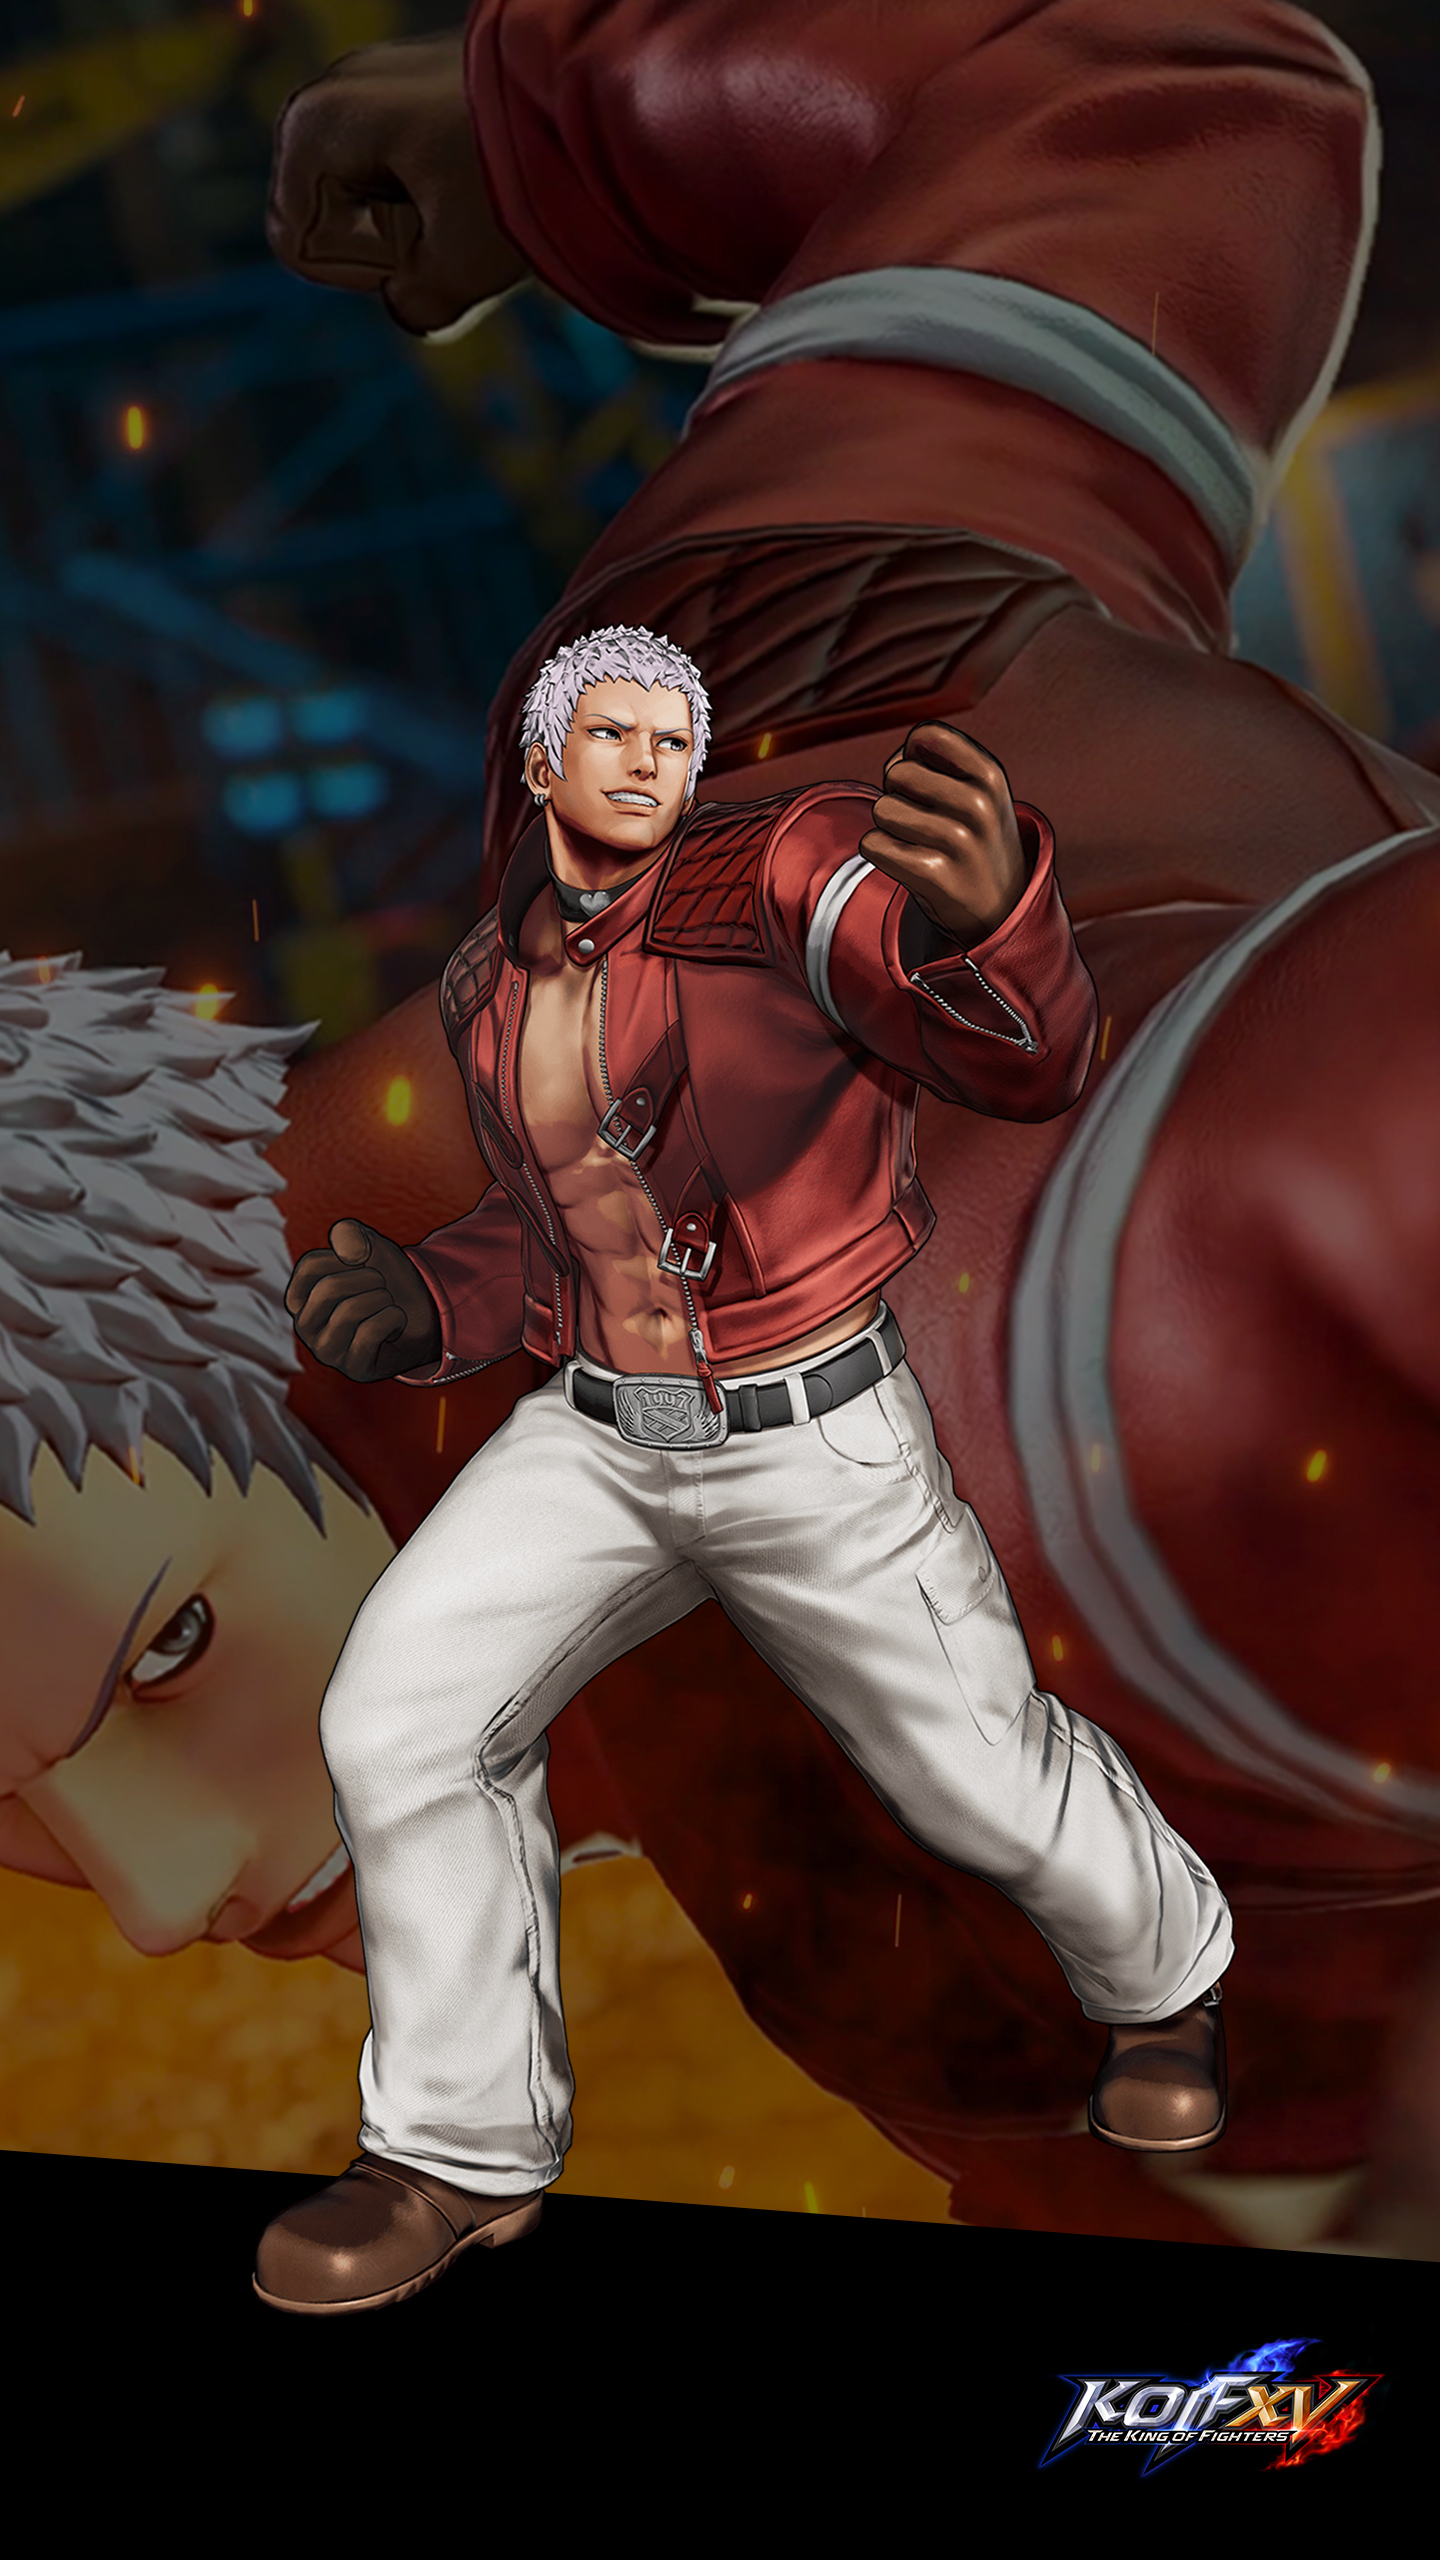 Yashiro Nanasake, The King of Fighters series artwork by Xiaoguimist.